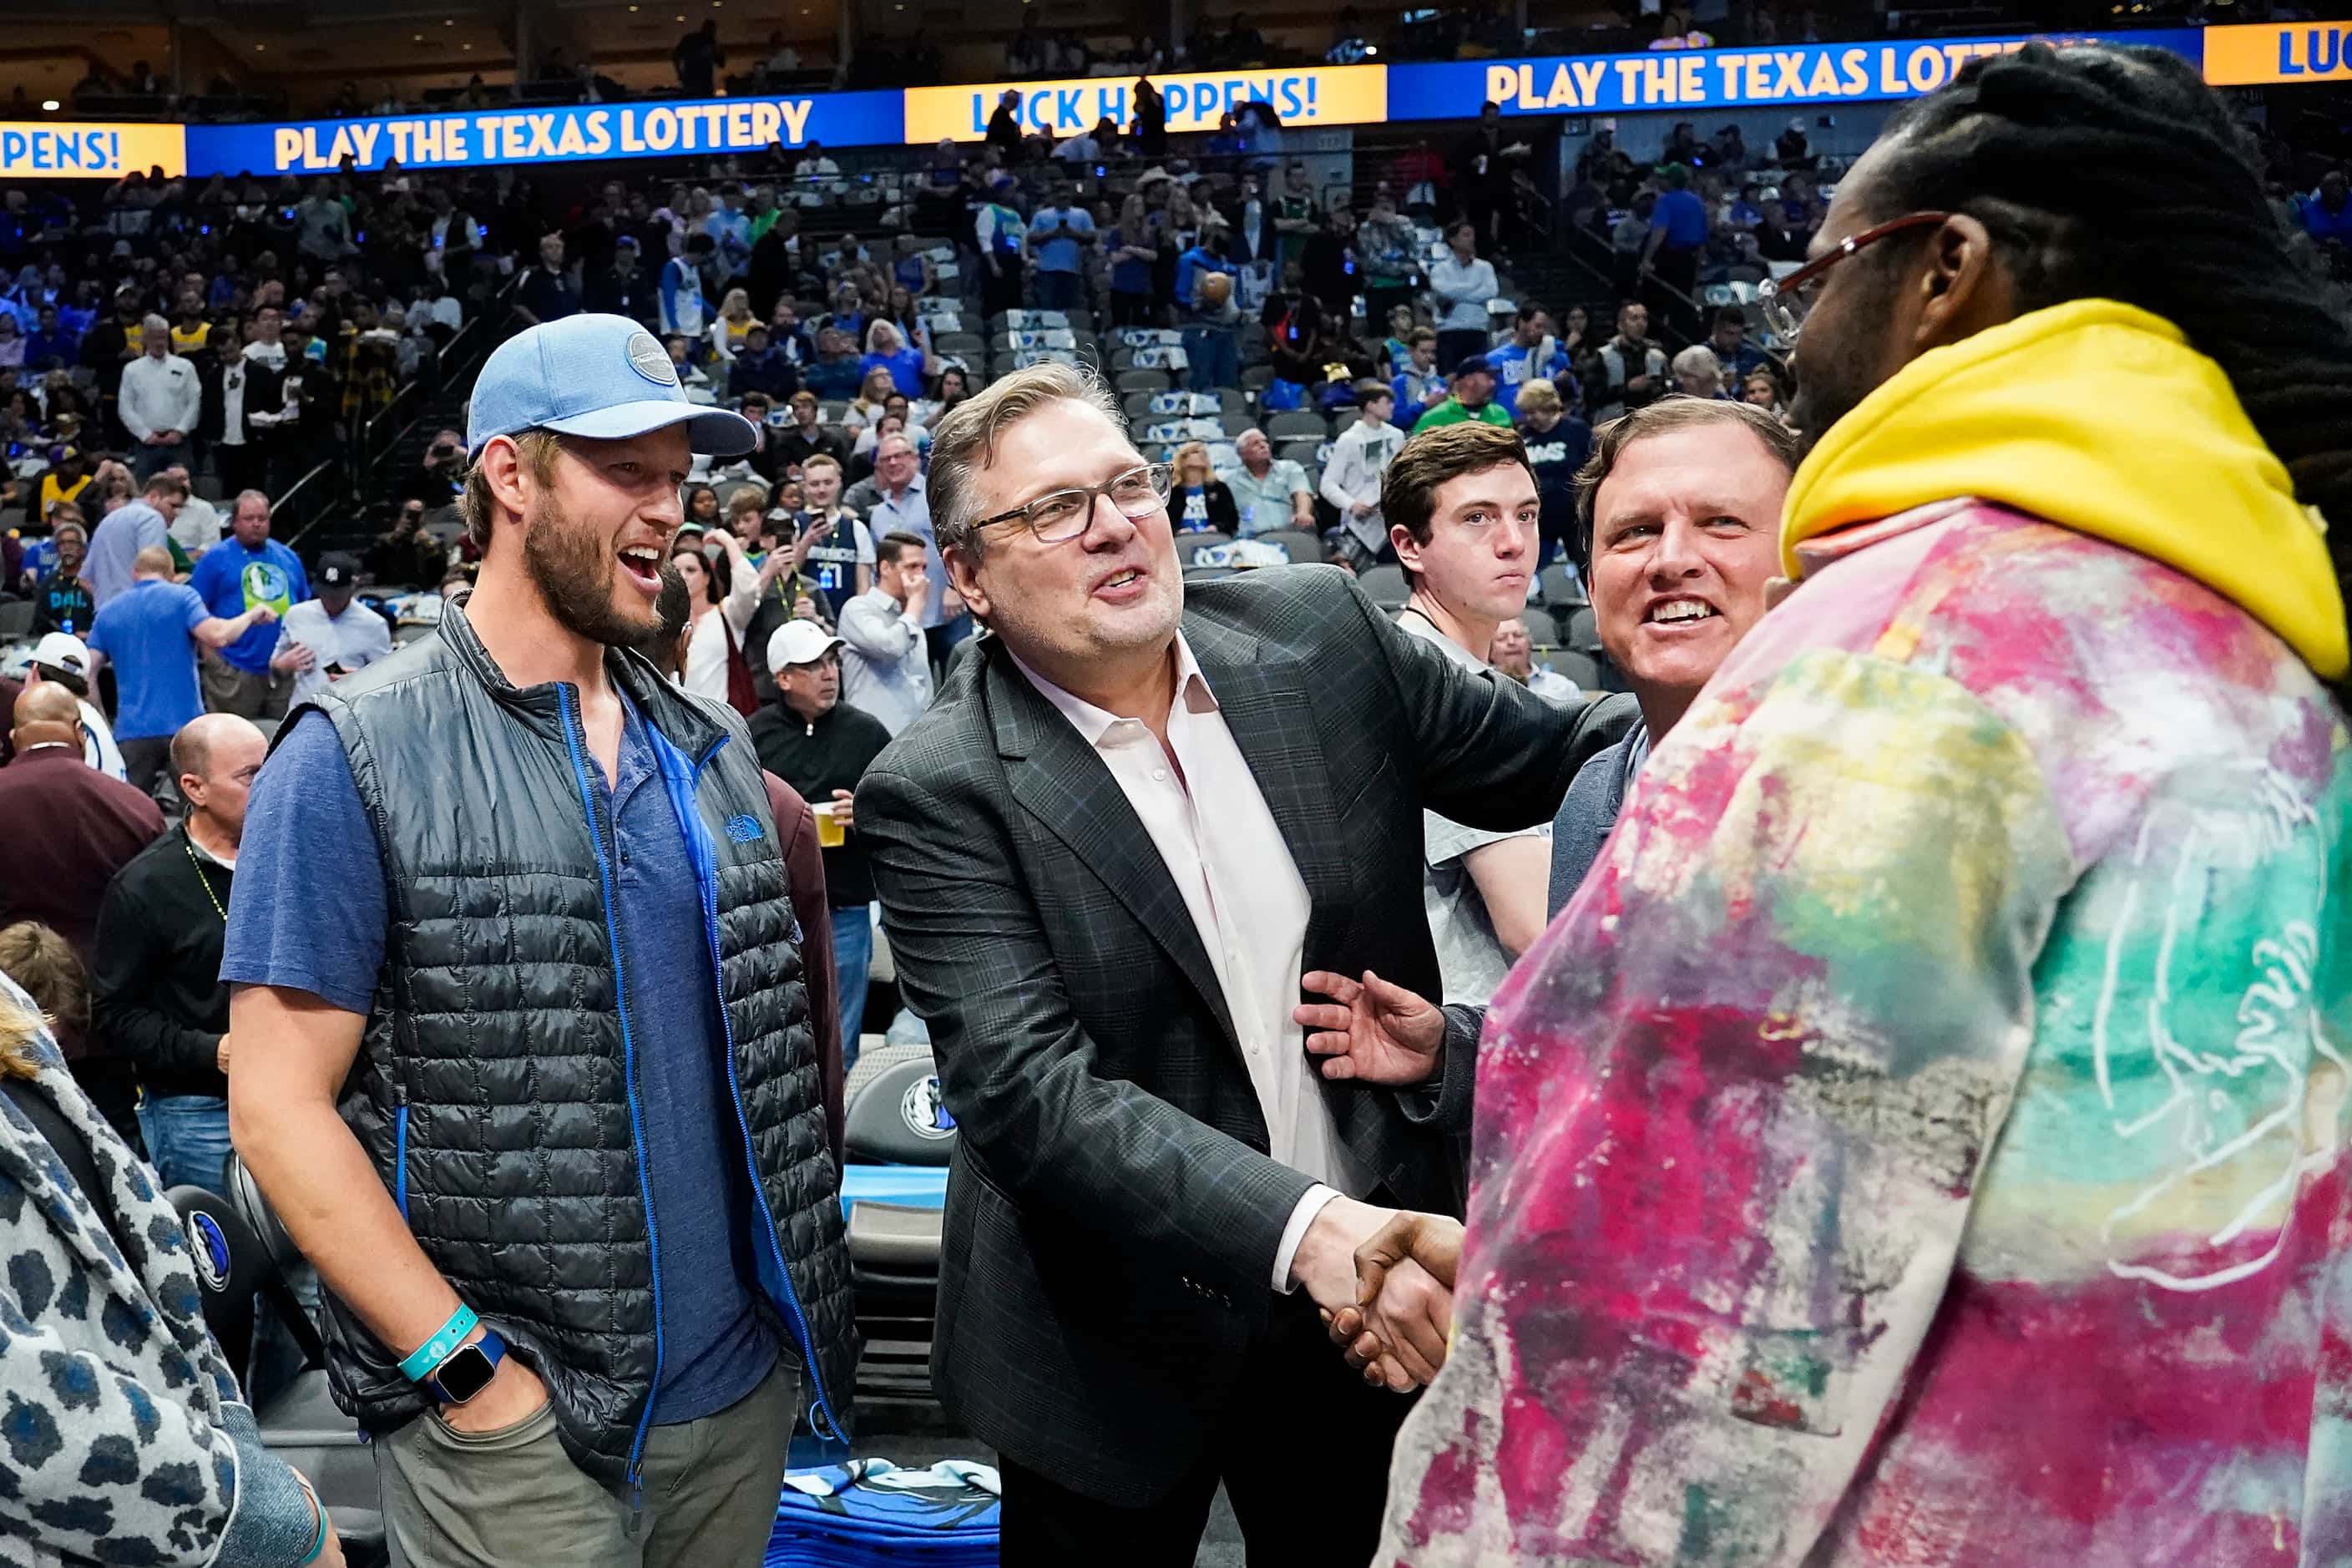 Dallas Mavericks general manager Donnie Nelson shakes hands with rapper 2 Chainz as Los...